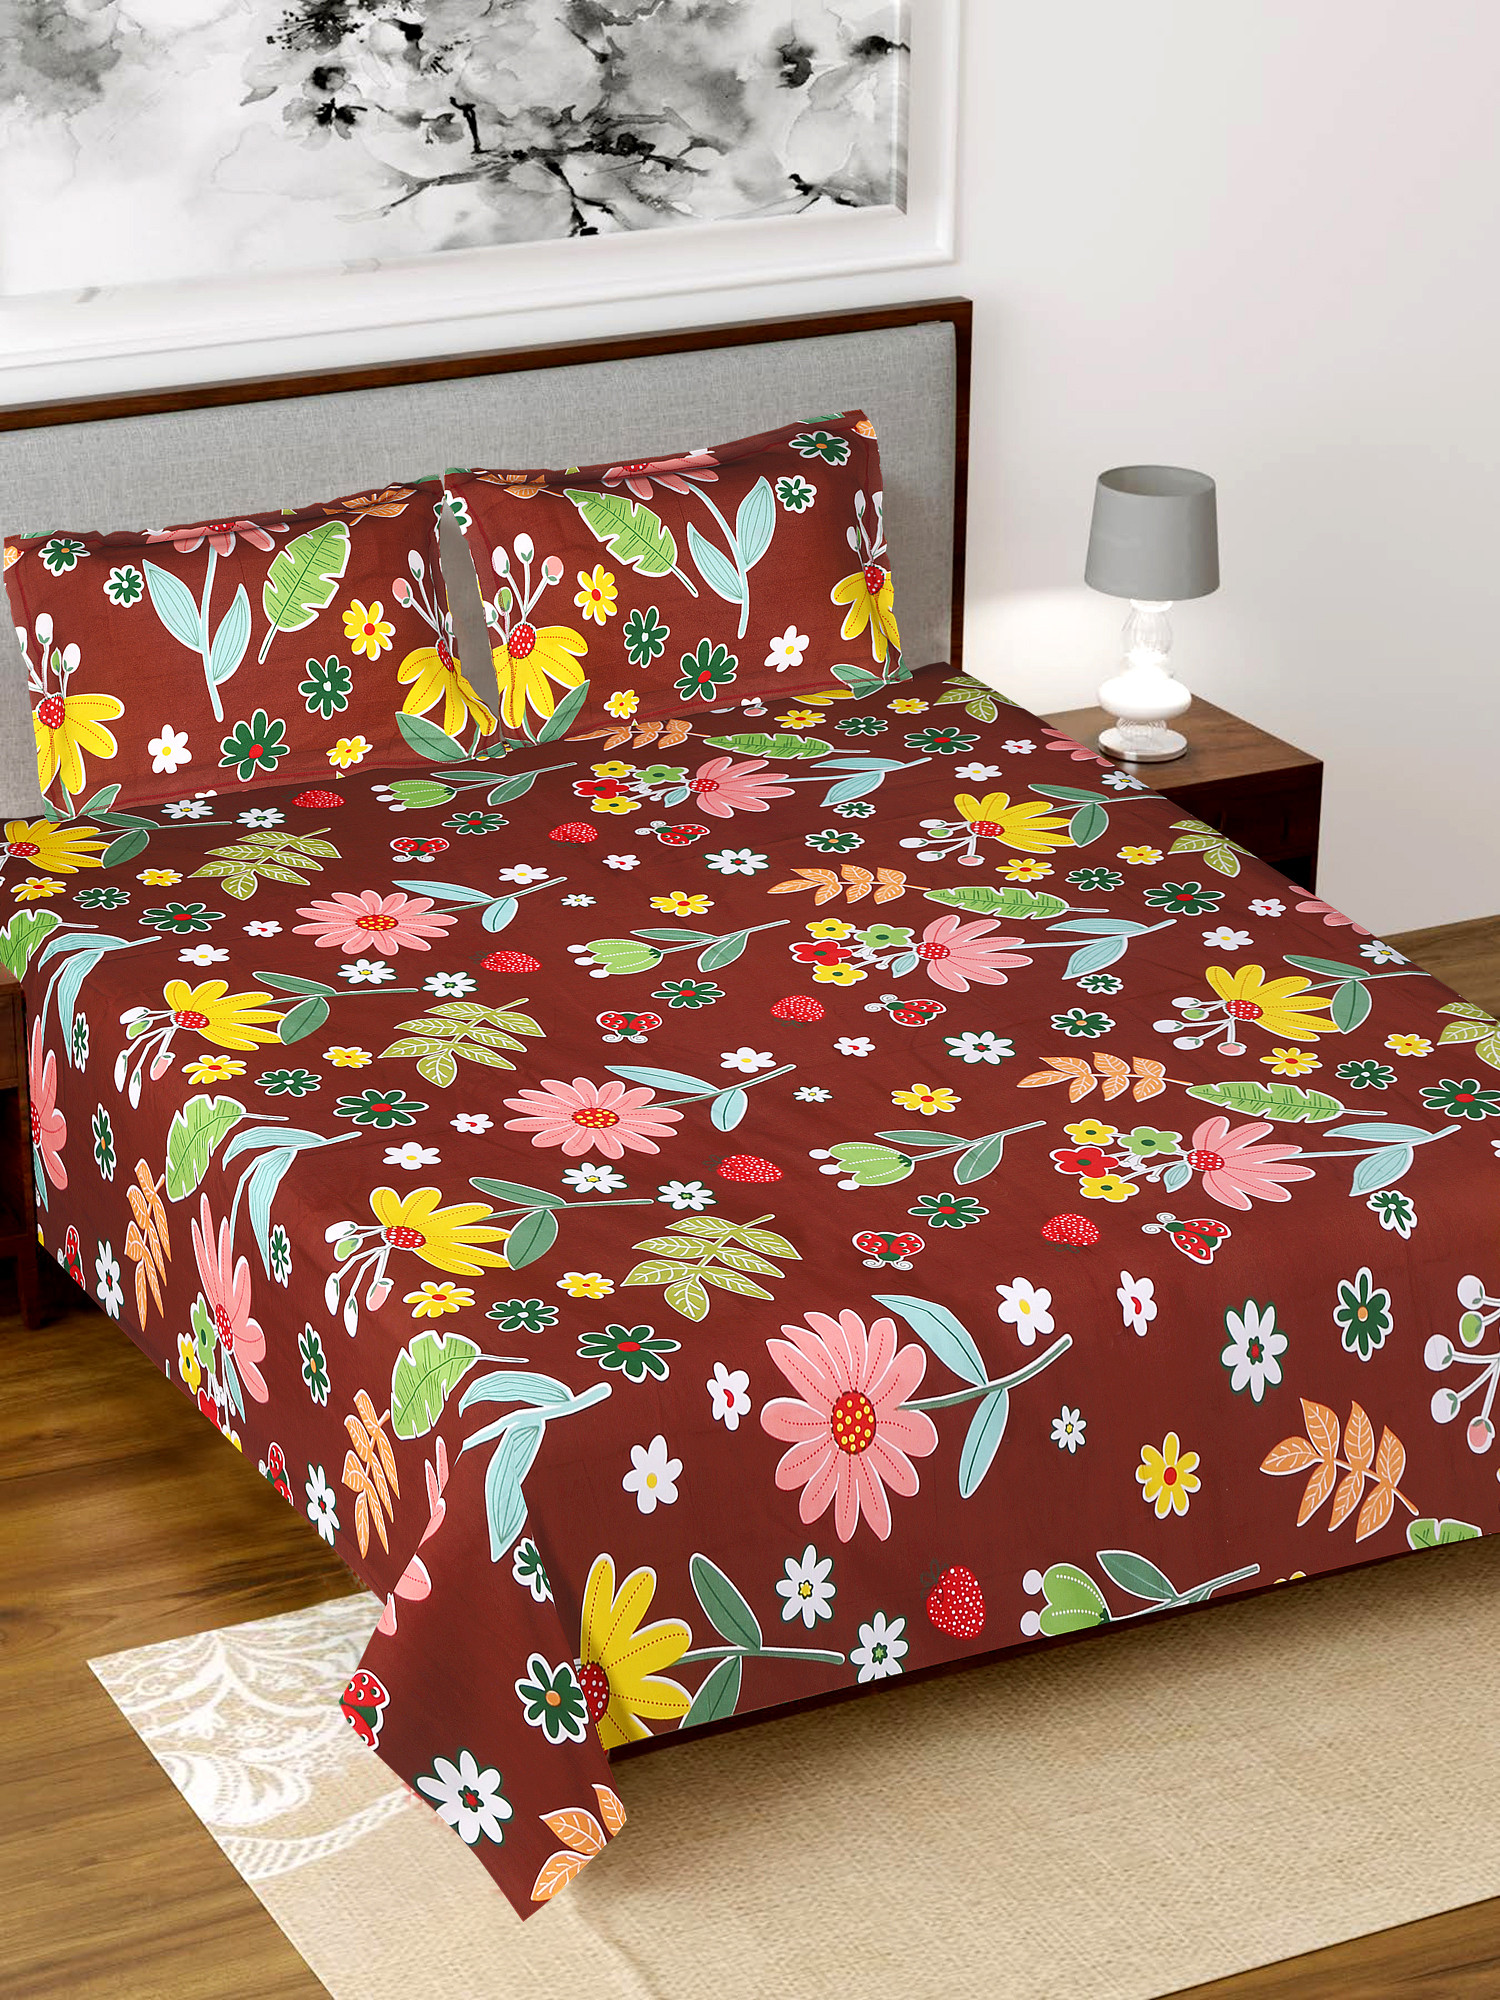 Kuber Industries Flower Printed Luxurious Soft Breathable & Comfortable Cotton Double Bedsheet With 2 Pillow Covers (Walnut)-HS43KUBMART26827